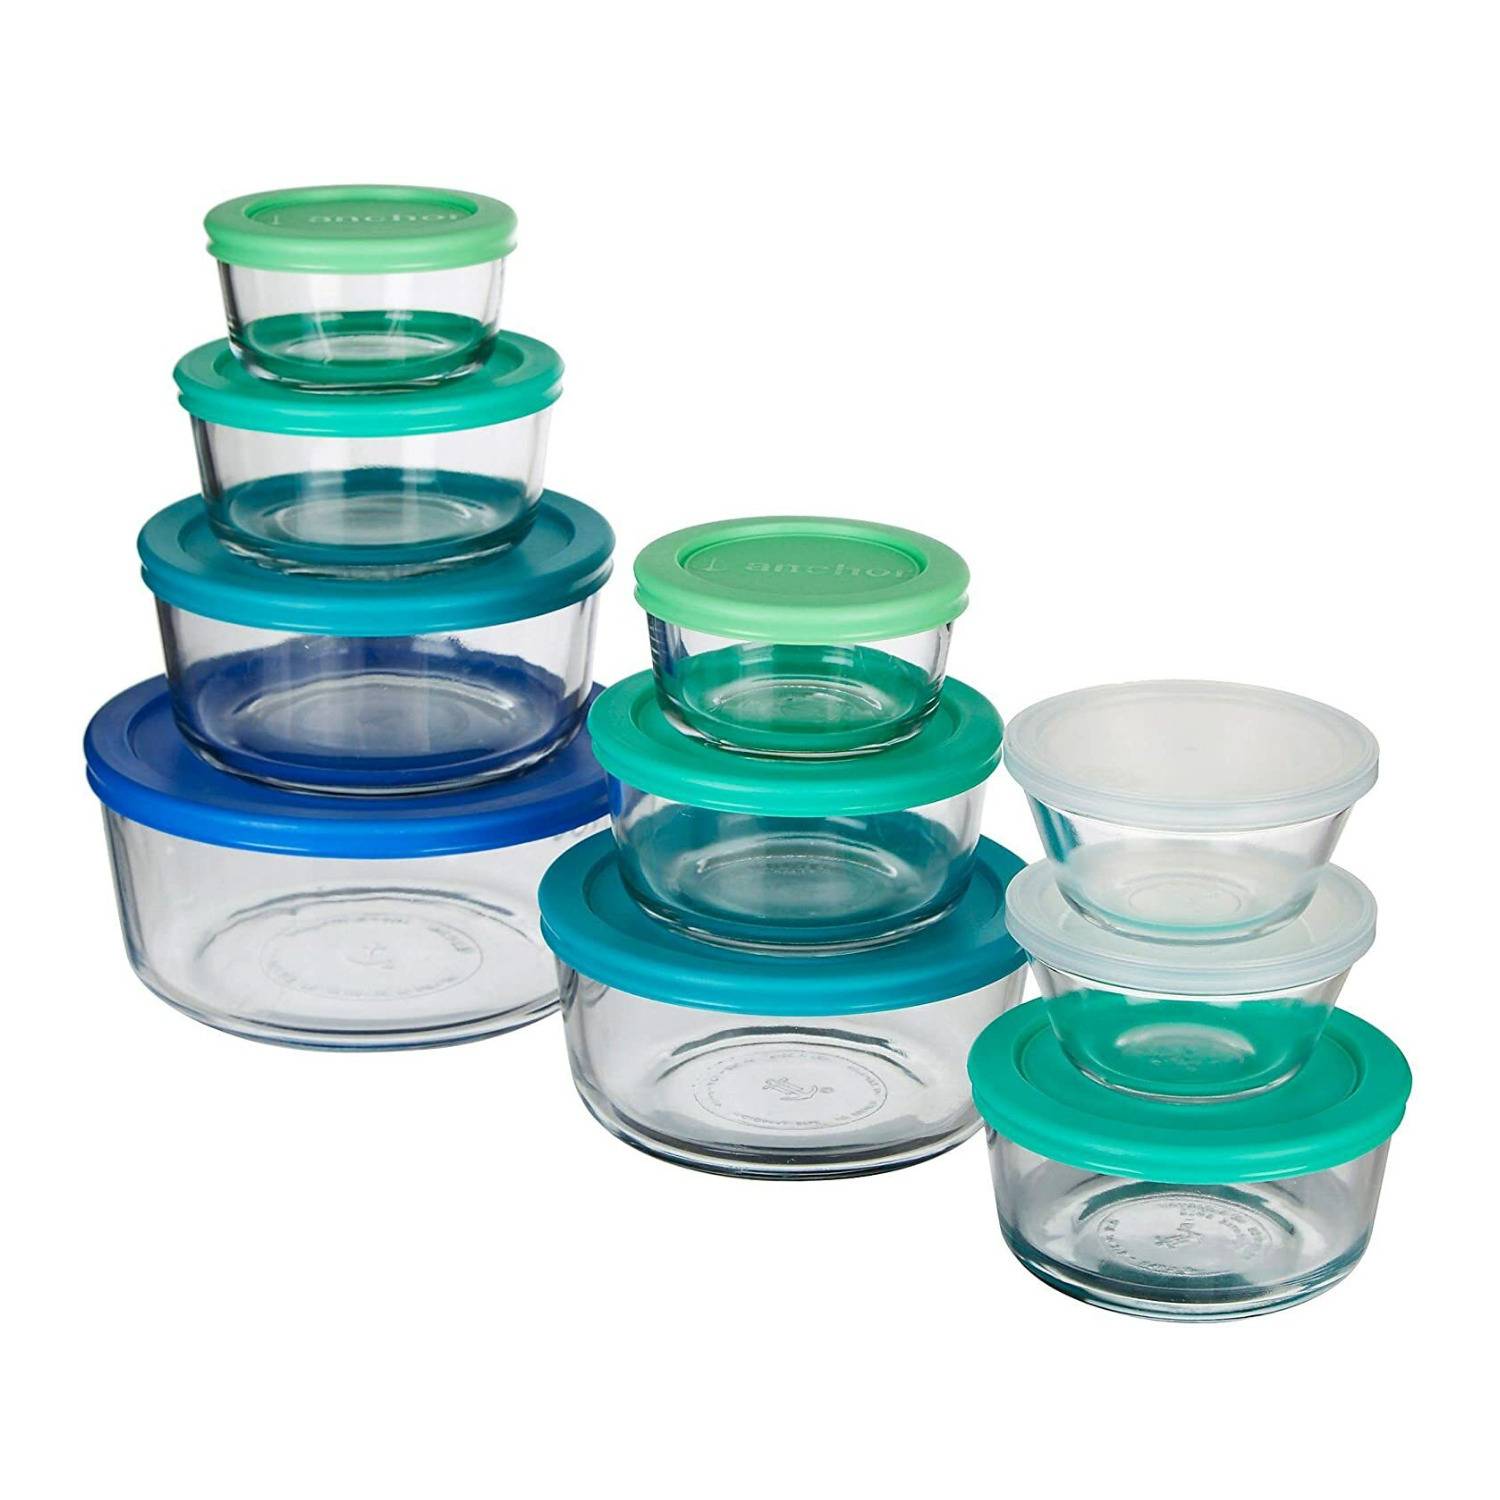 Anchor Hocking TrueSeal 20-Piece Round Glass Food Storage Set with Blue/Green Lid